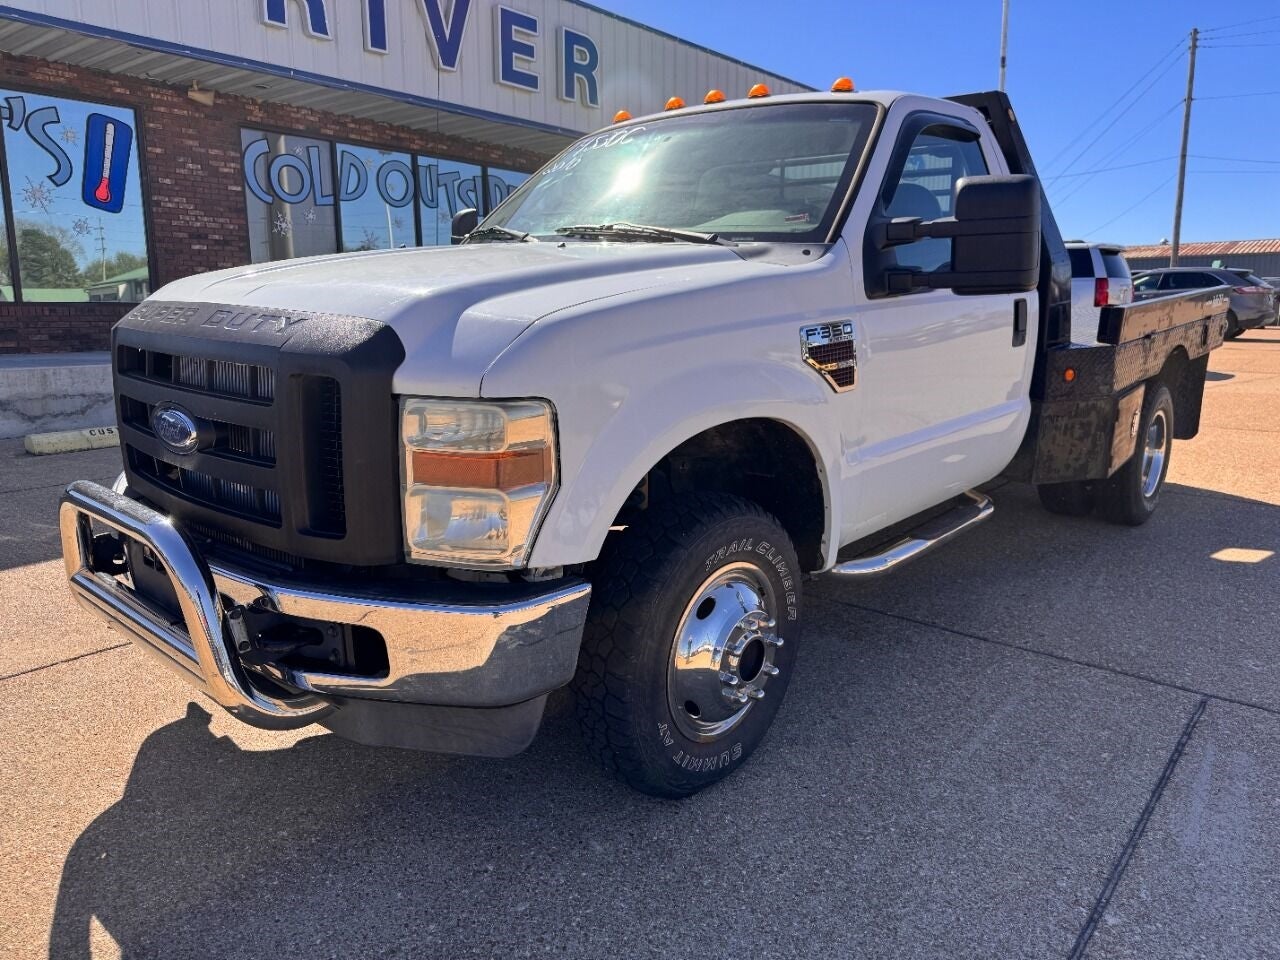 2010 Ford F-350 Super Duty XLT 4x4 2dr Regular Cab 141 in. WB DRW Chassis